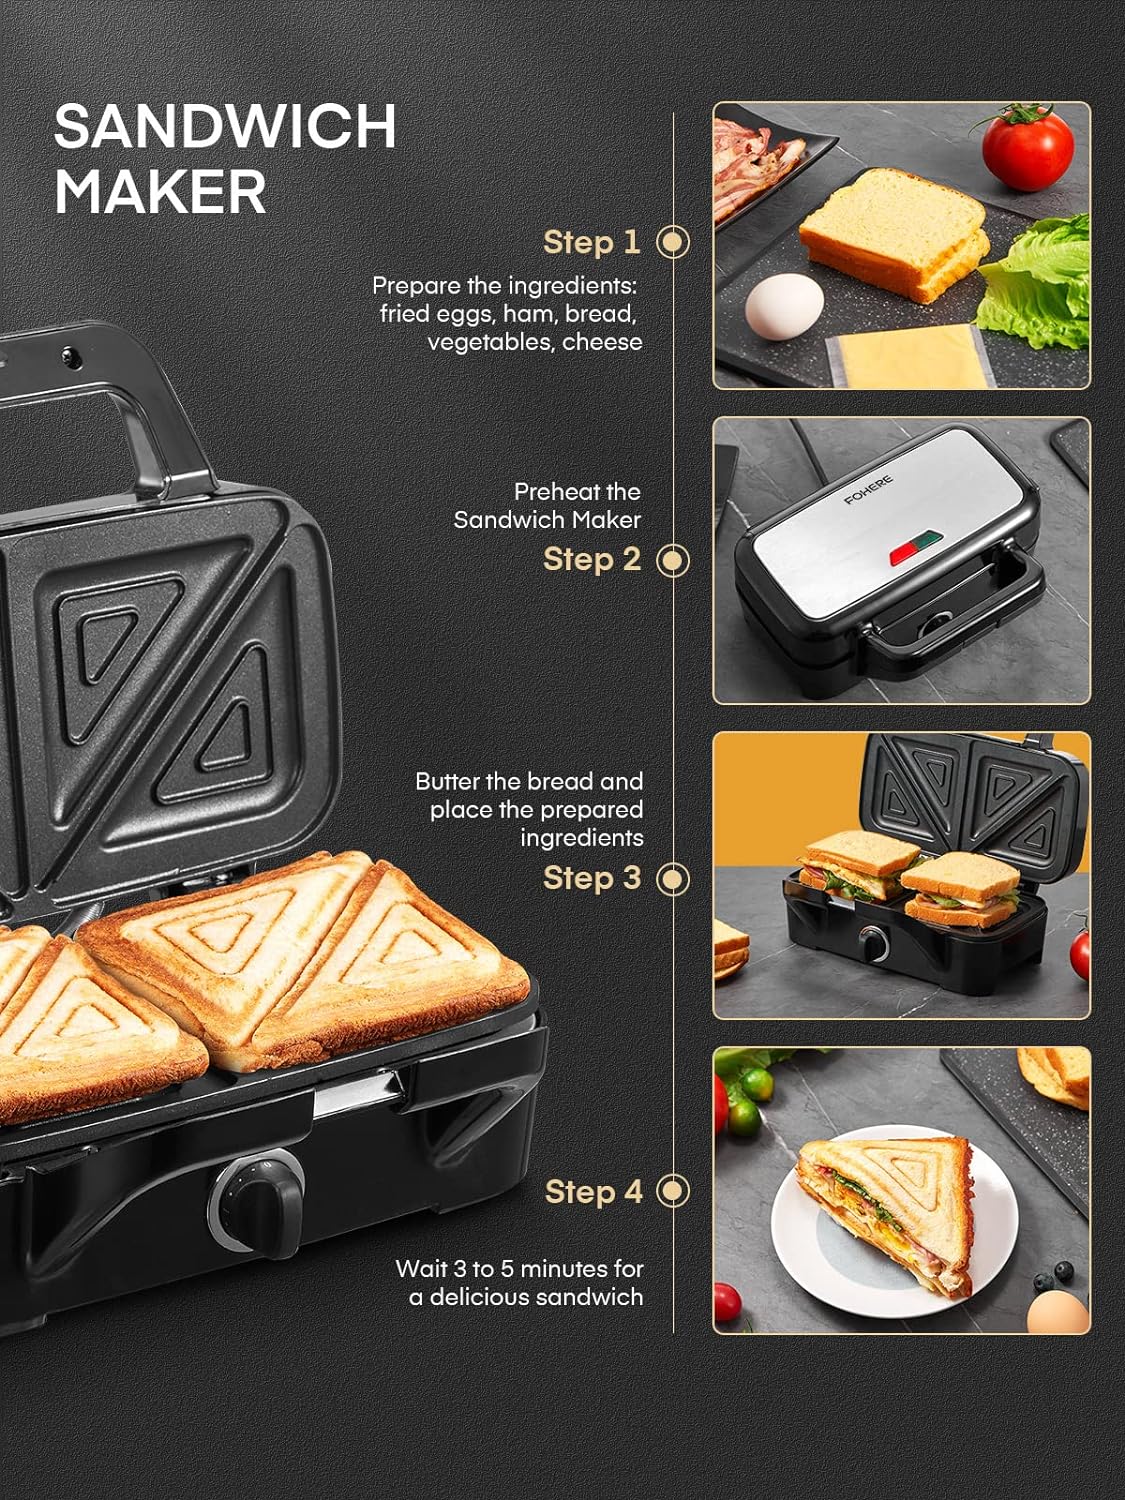 FOHERE Waffle Maker 3 in 1 Sandwich Maker 1200W Panini Press With